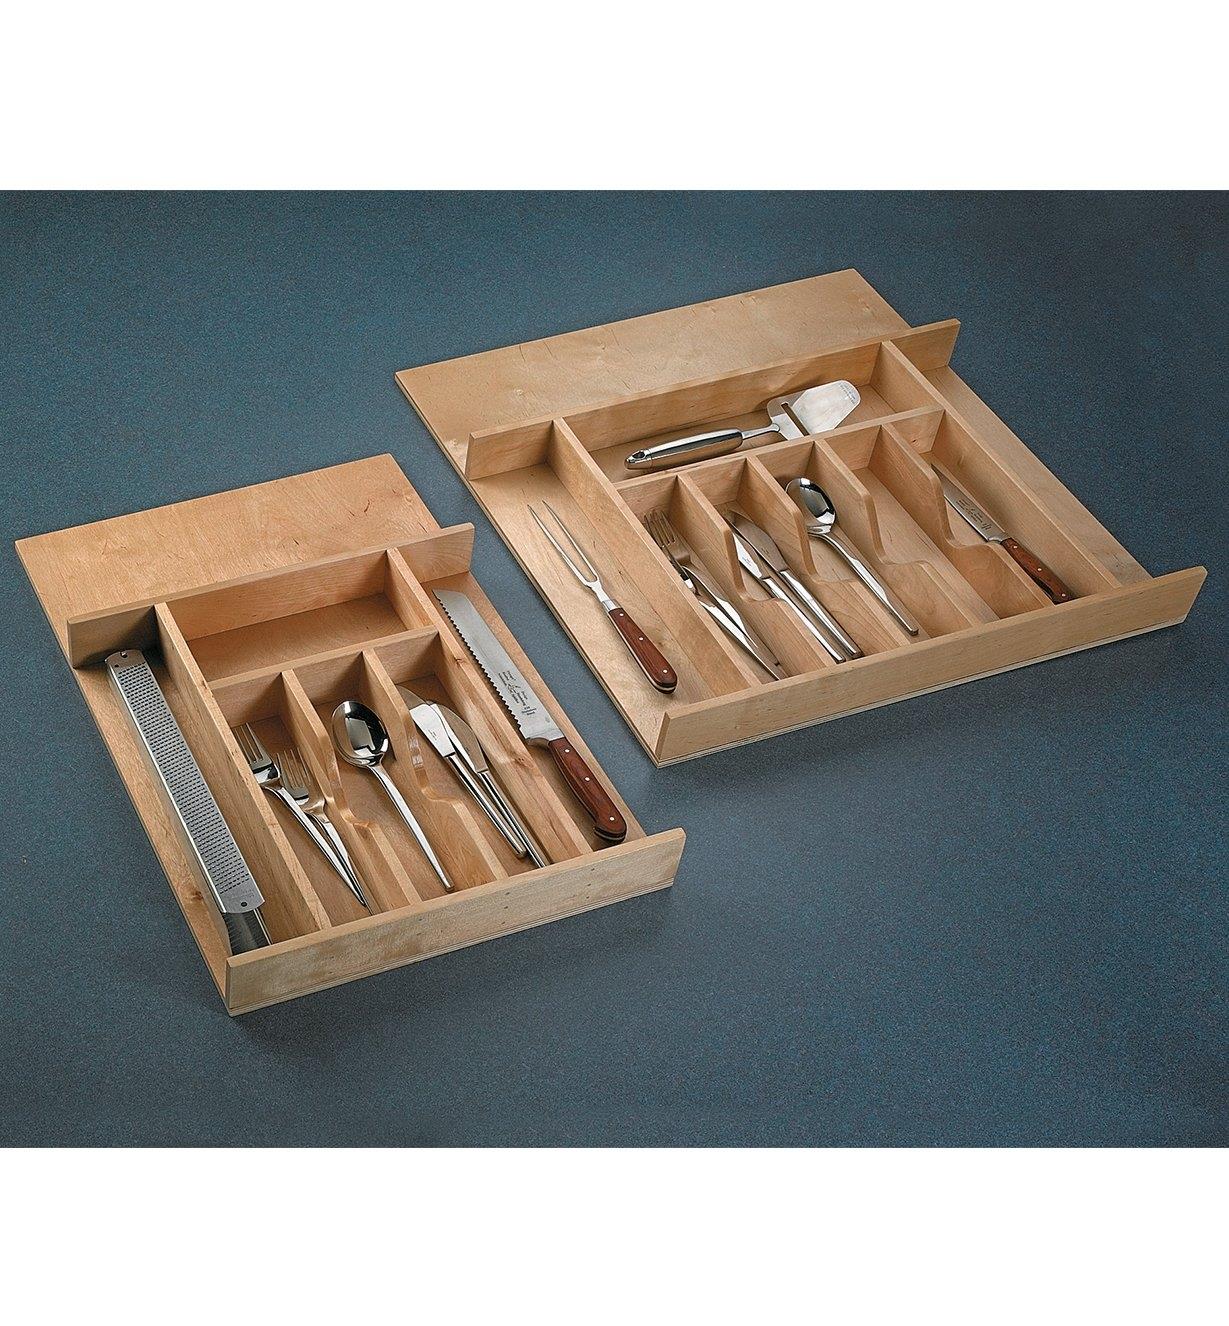 Details about   Short Trim-to-Fit Wooden Cutlery 9 Compartment Tray Insert Utensil Organizer 